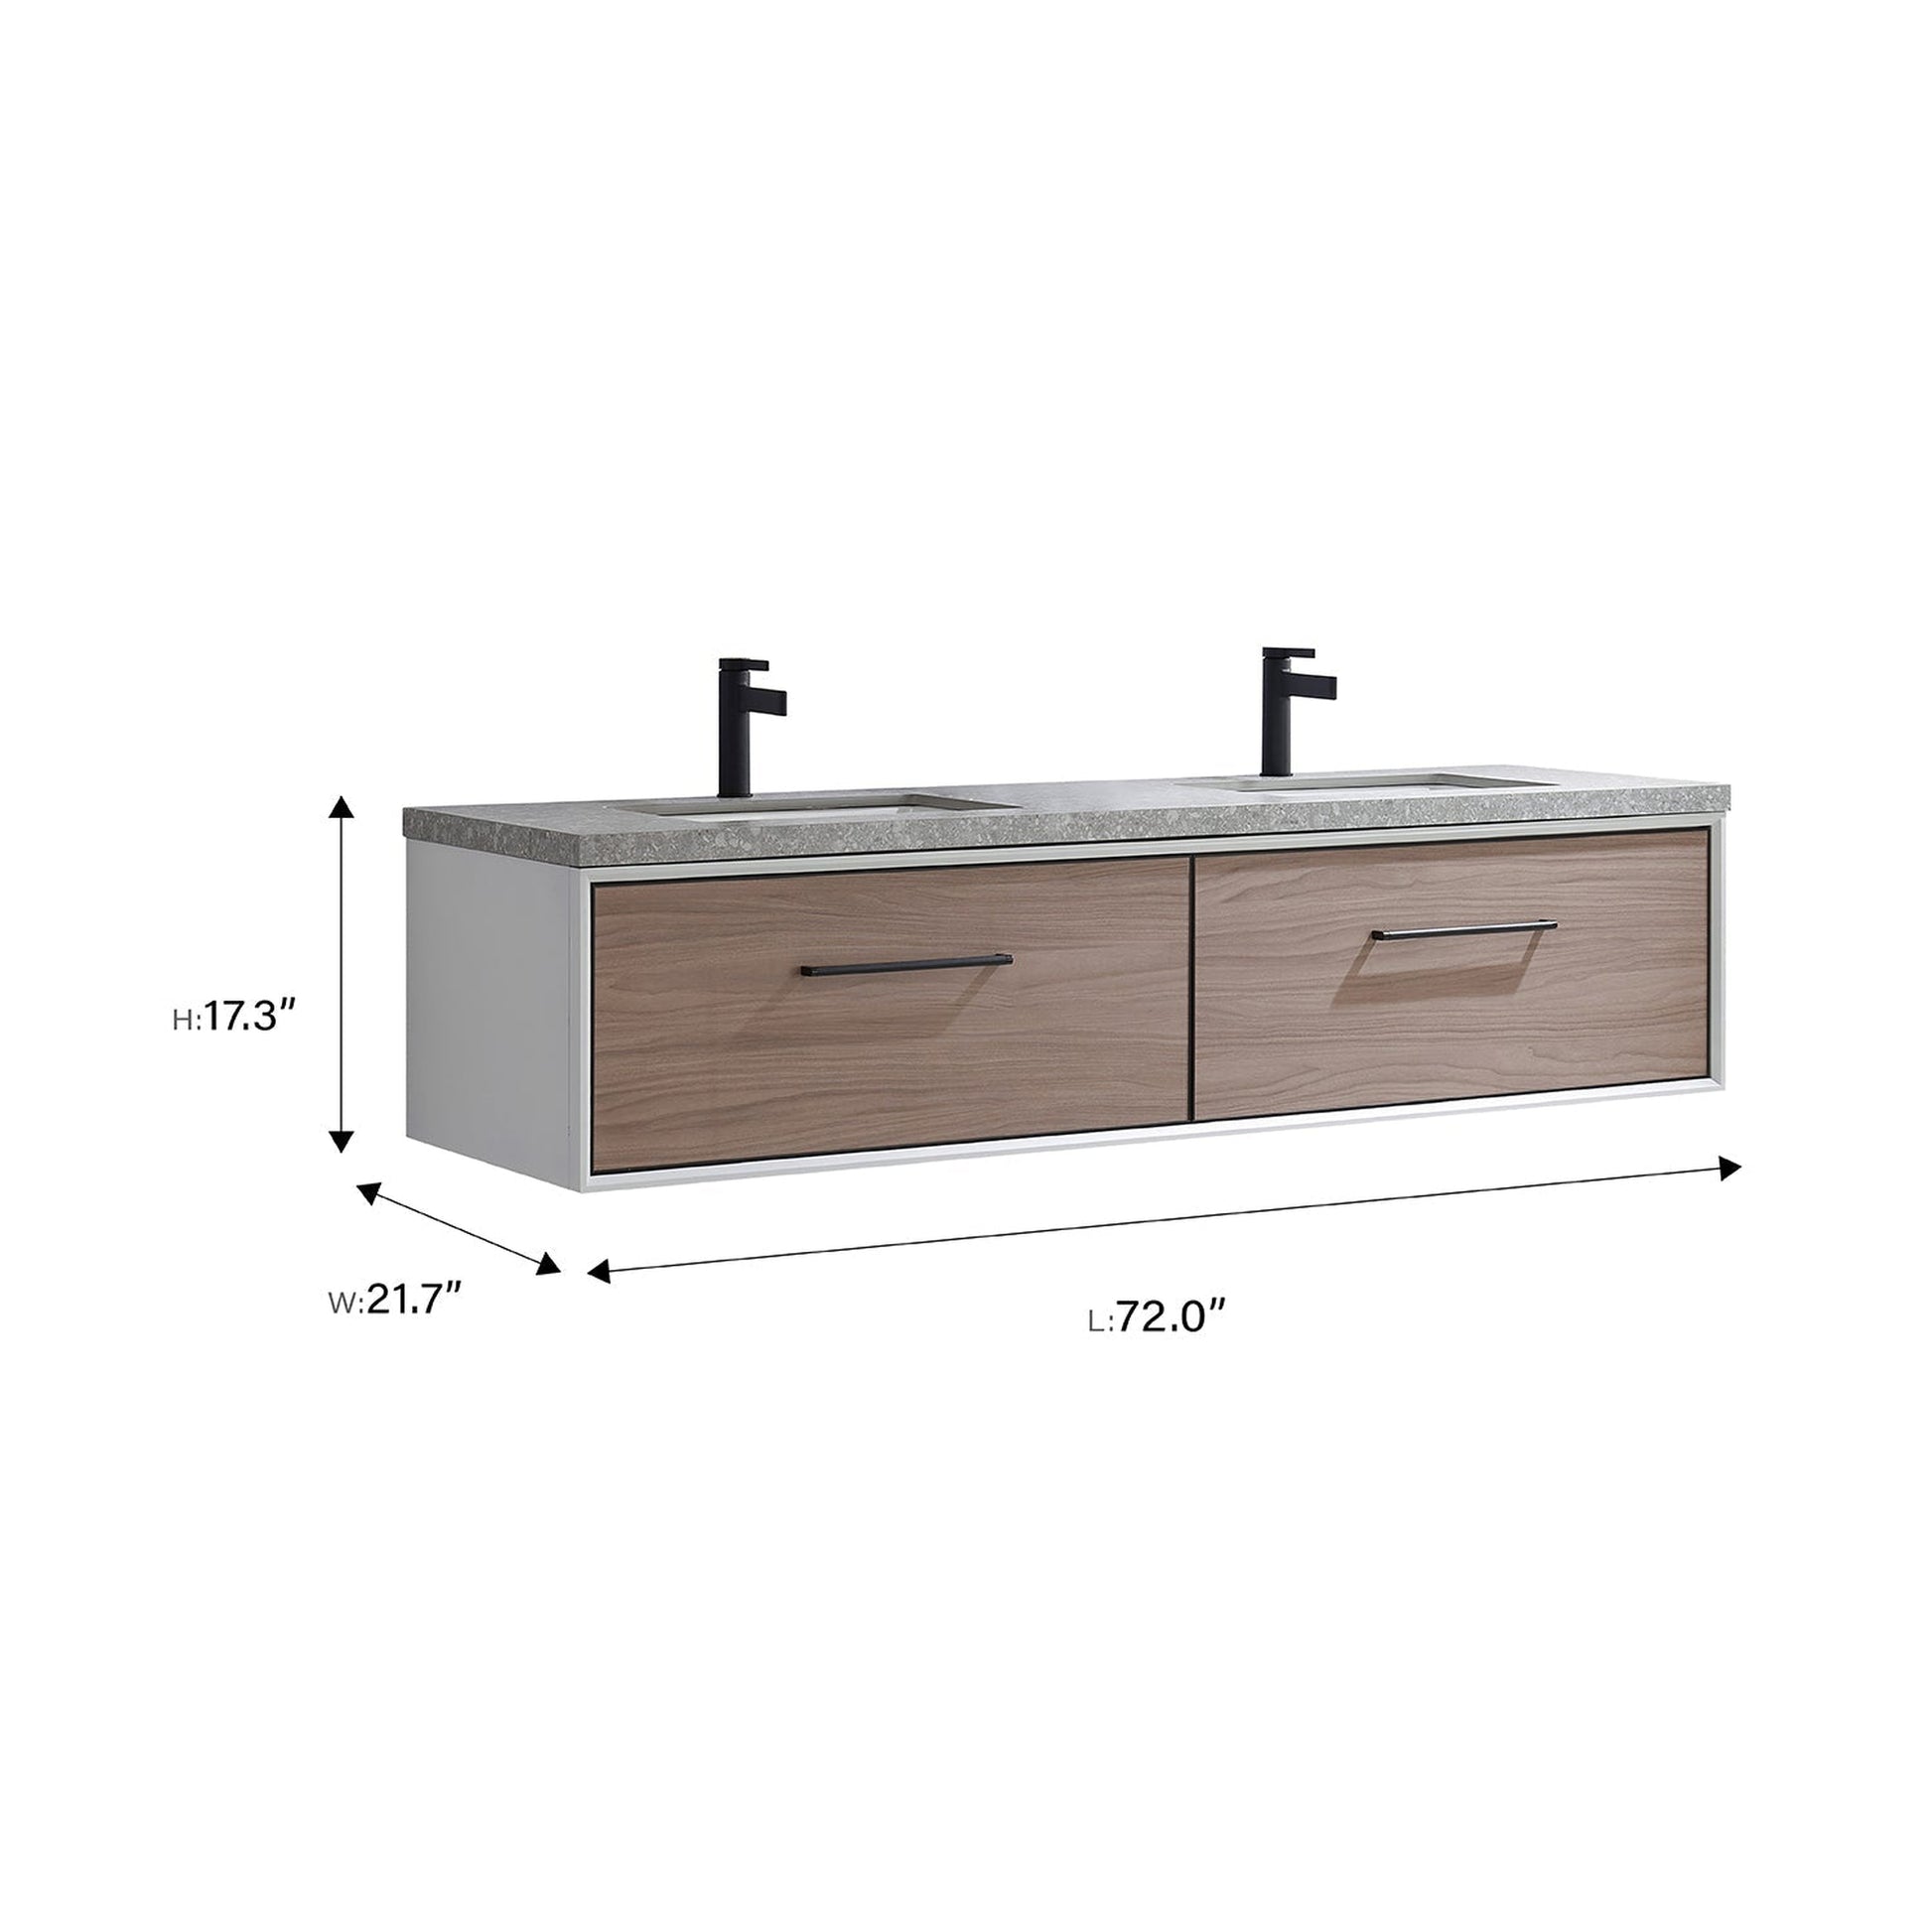 Vinnova Caparroso 72" Double Sink Floating Bathroom Vanity In Light Walnut And Matte Black Hardware Finish With Grey Sintered Stone Top